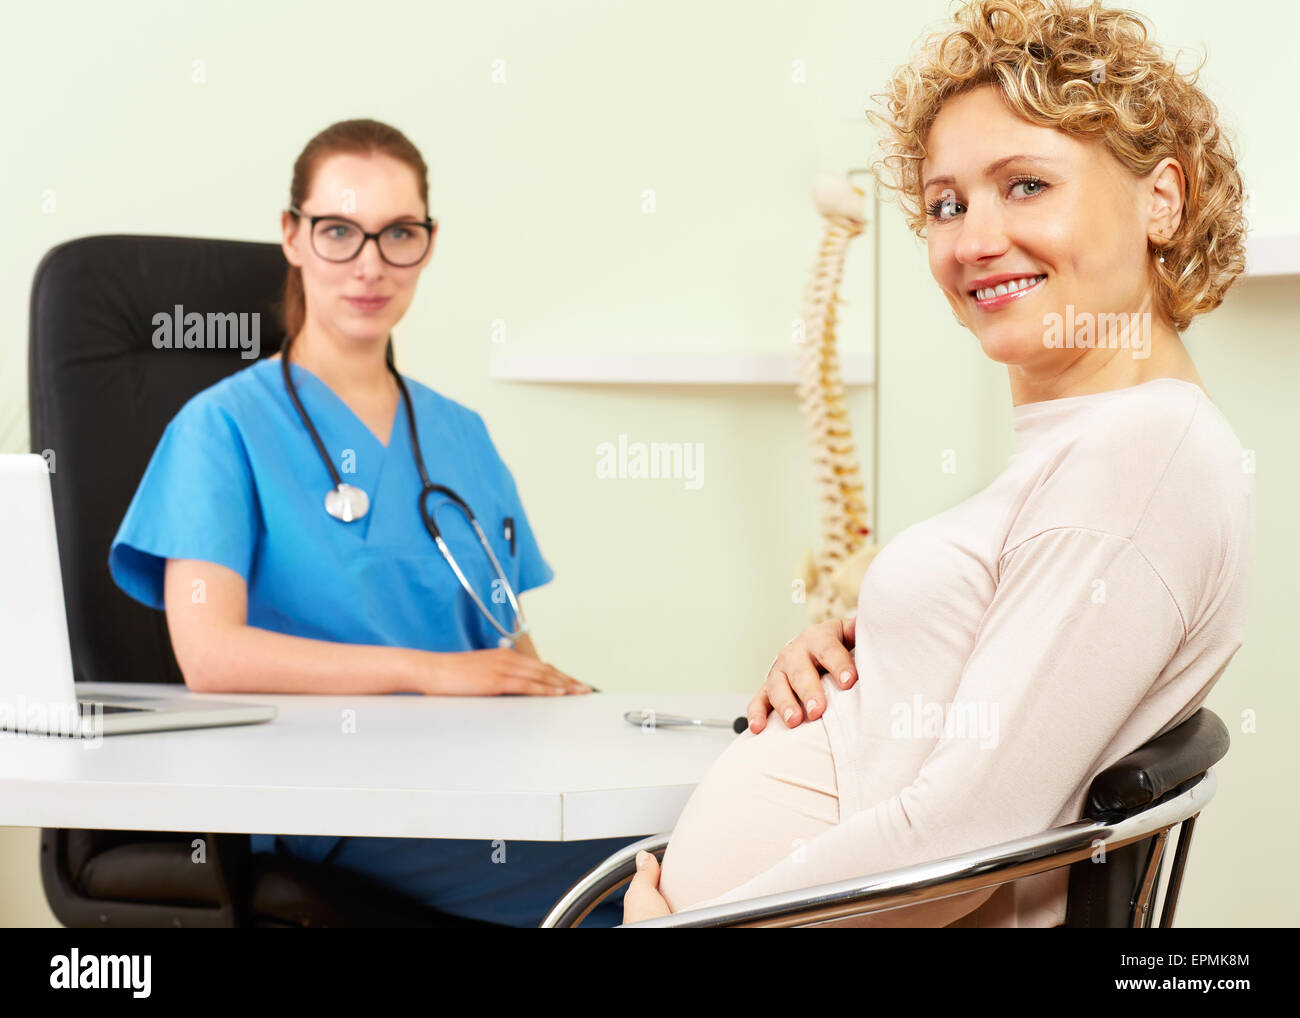 Woman doctor with a patient in treatment. Stock Photo